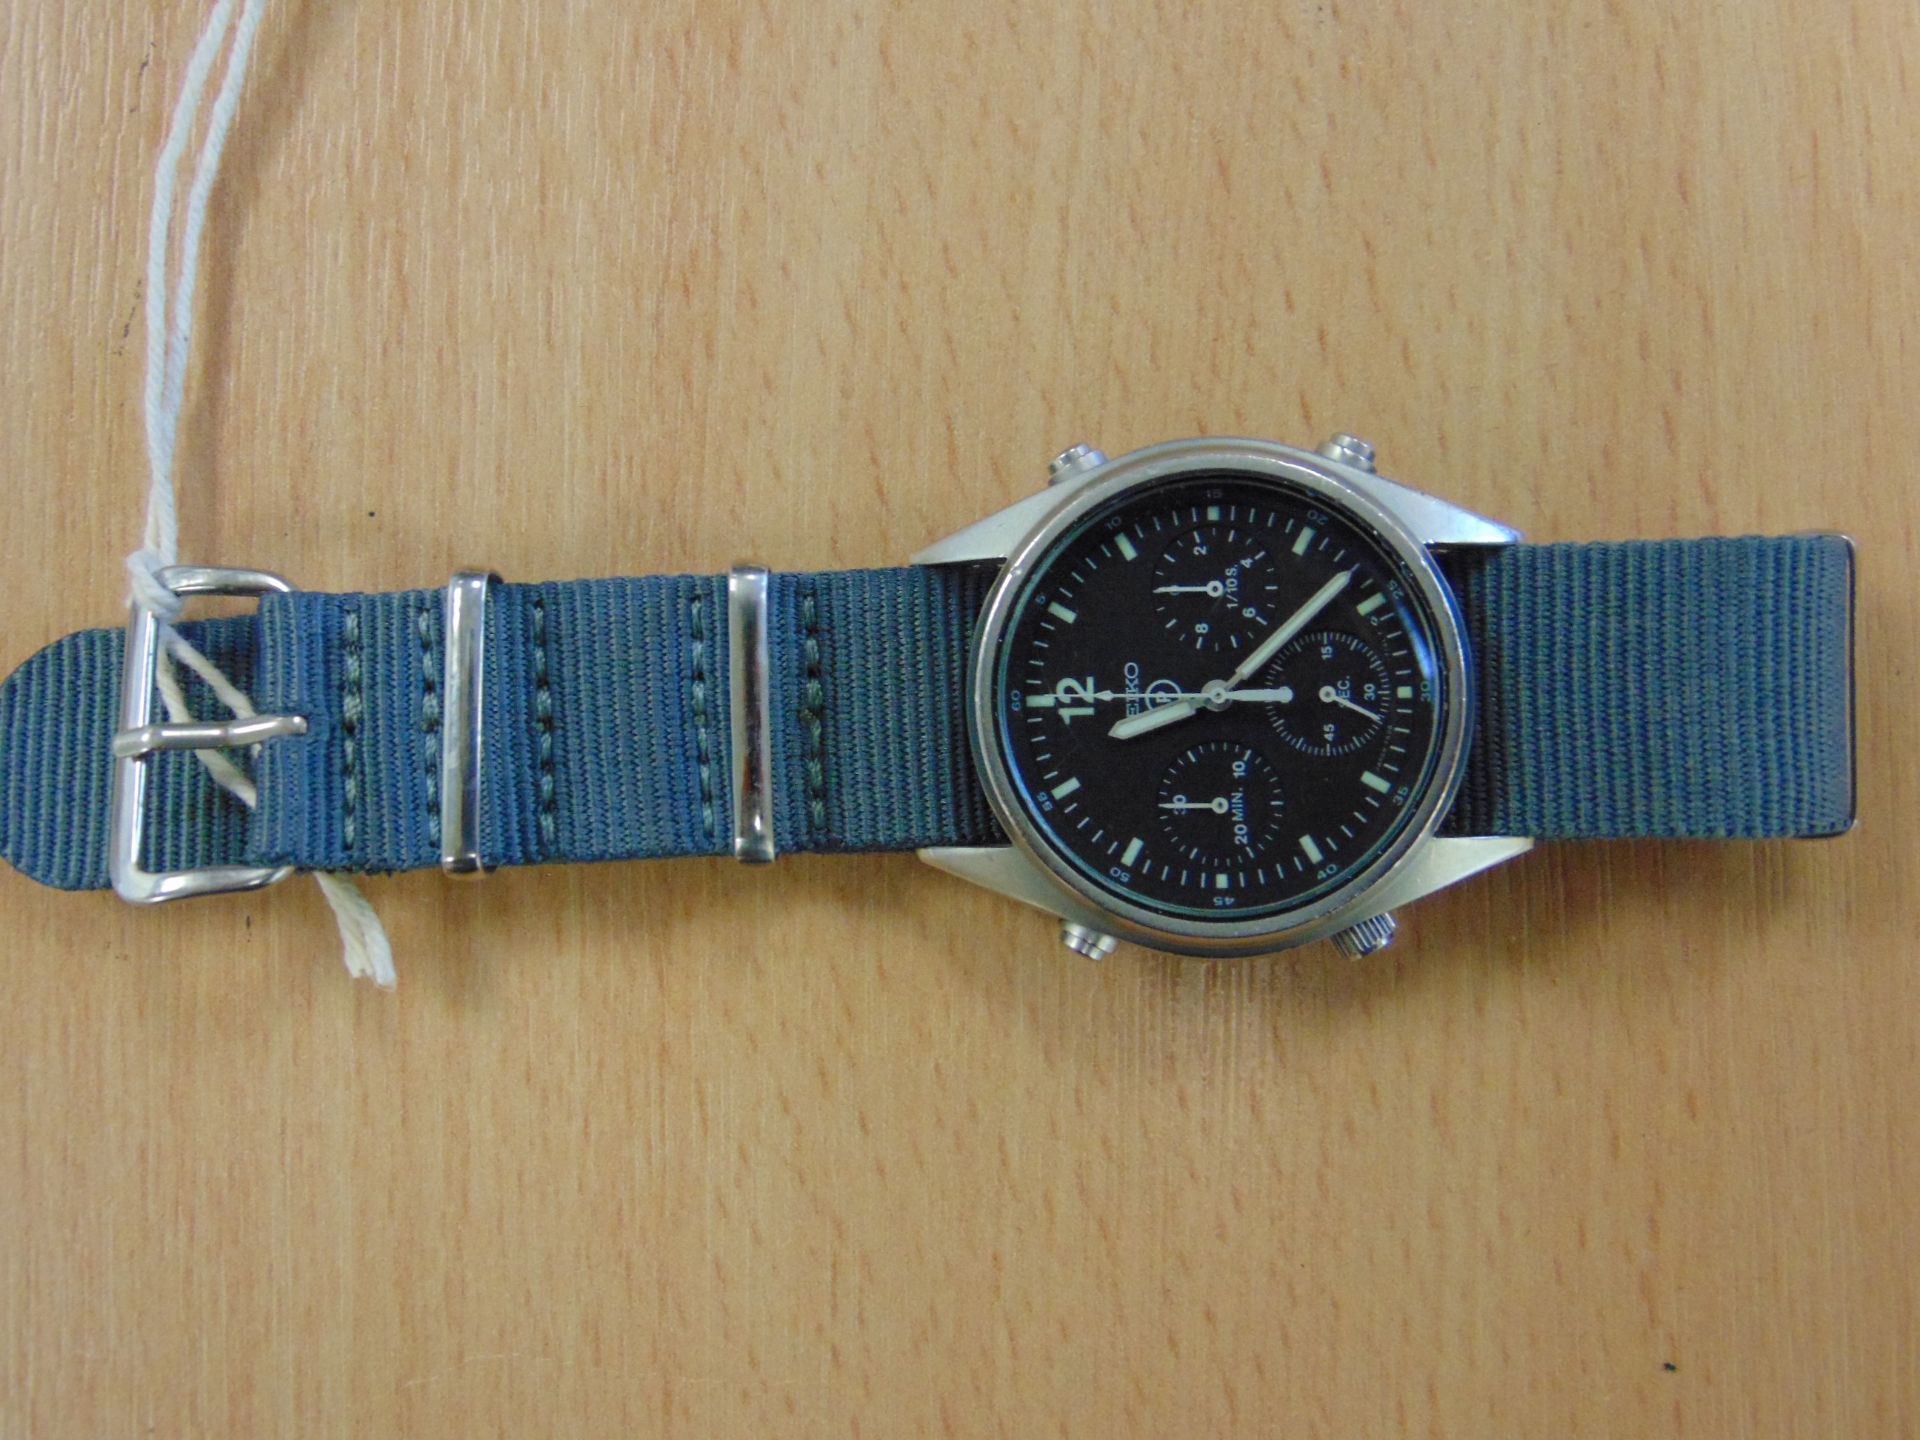 Very Nice SEIKO GEN I PILOTS CHRONO R.A.F. ISSUE NATO MARKED DATED 1990 ( GULF WAR) - Image 6 of 8